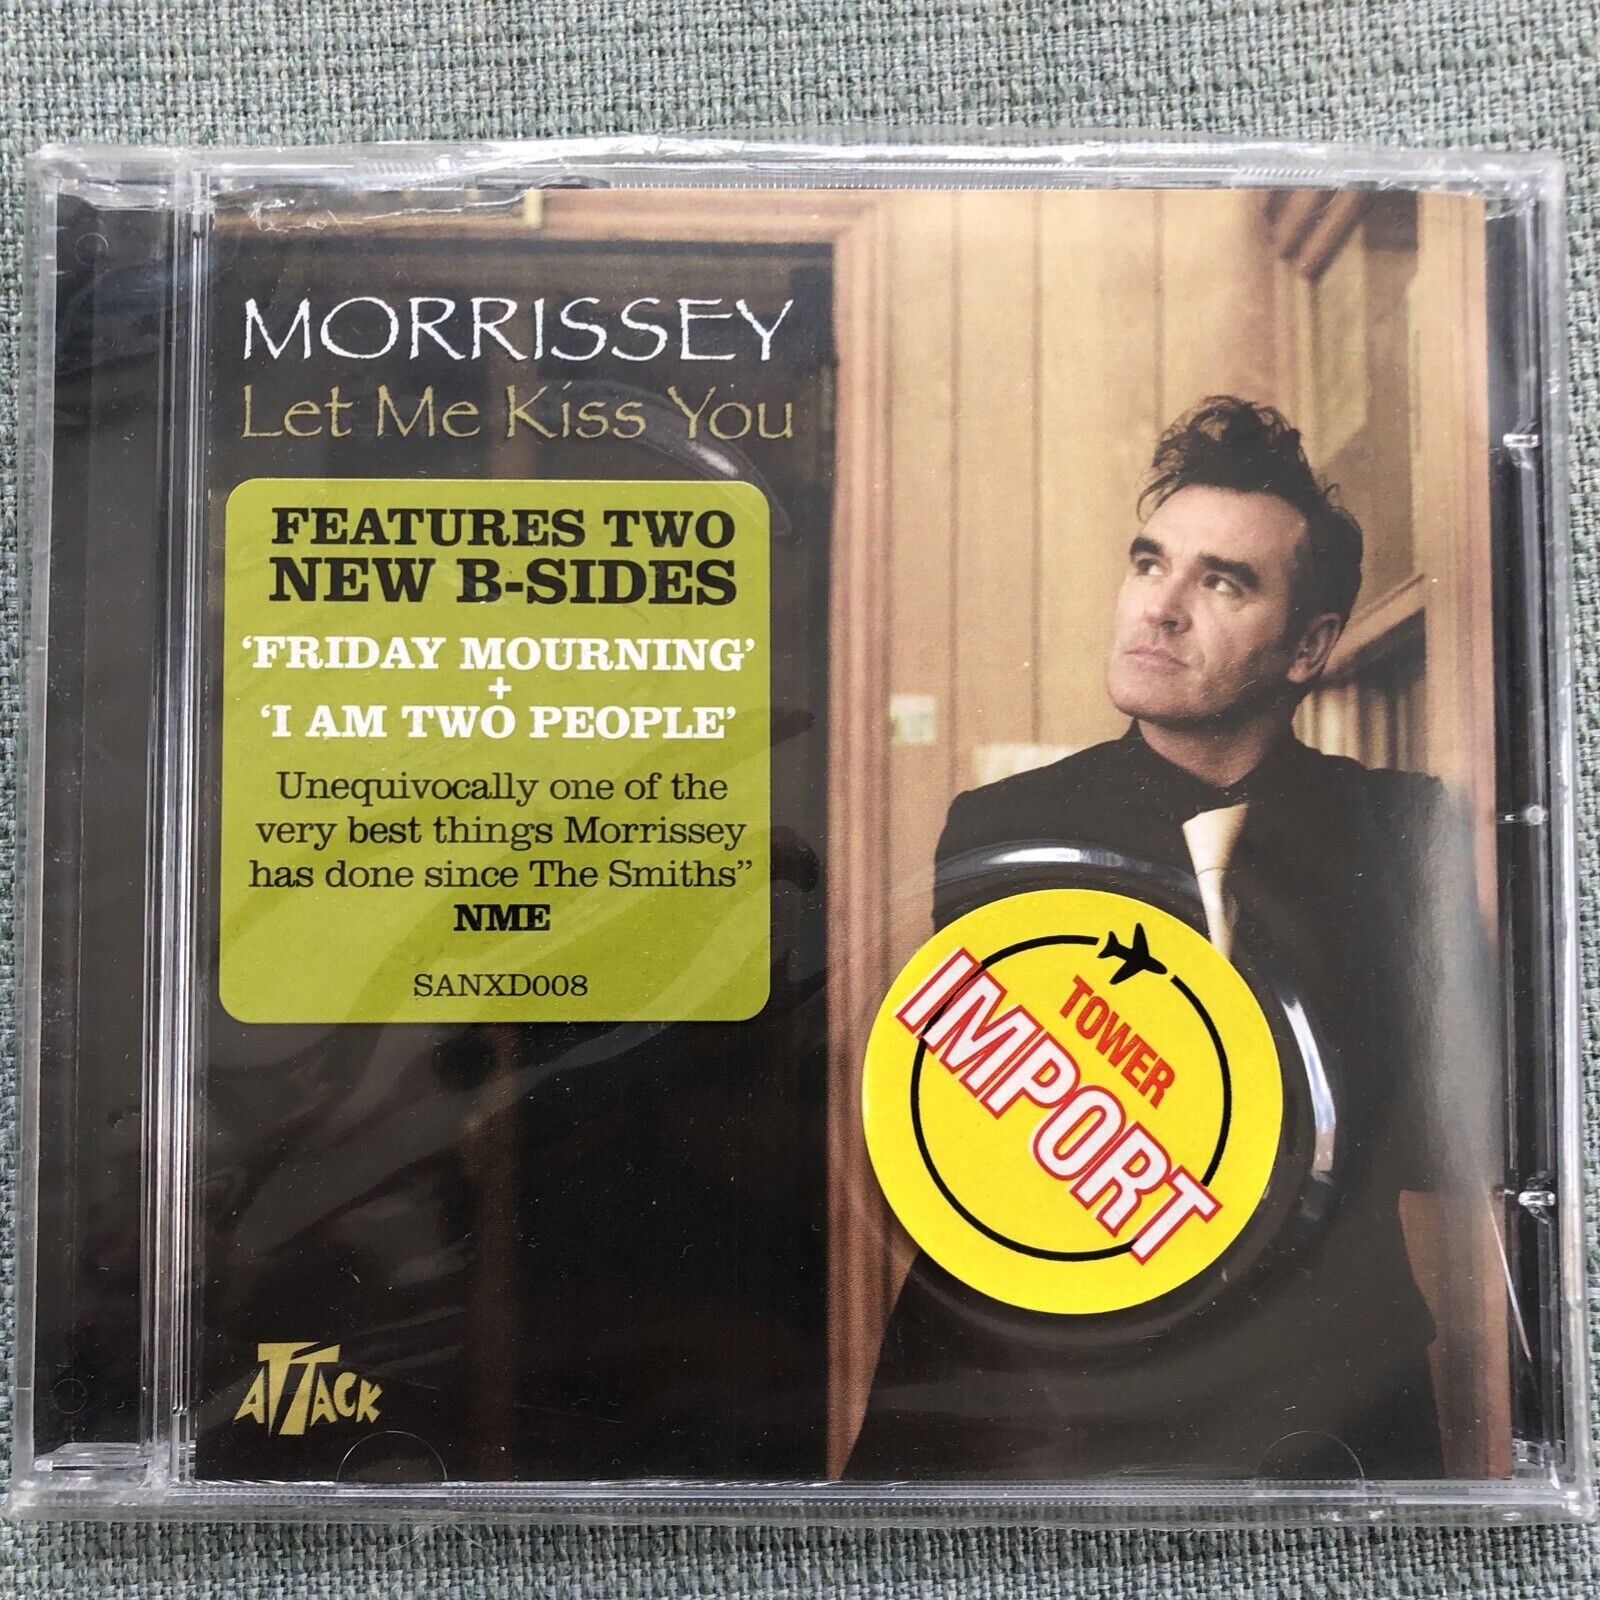 Let Me Kiss You [CD #1] [Single] by Morrissey (CD, 2004, Attack)